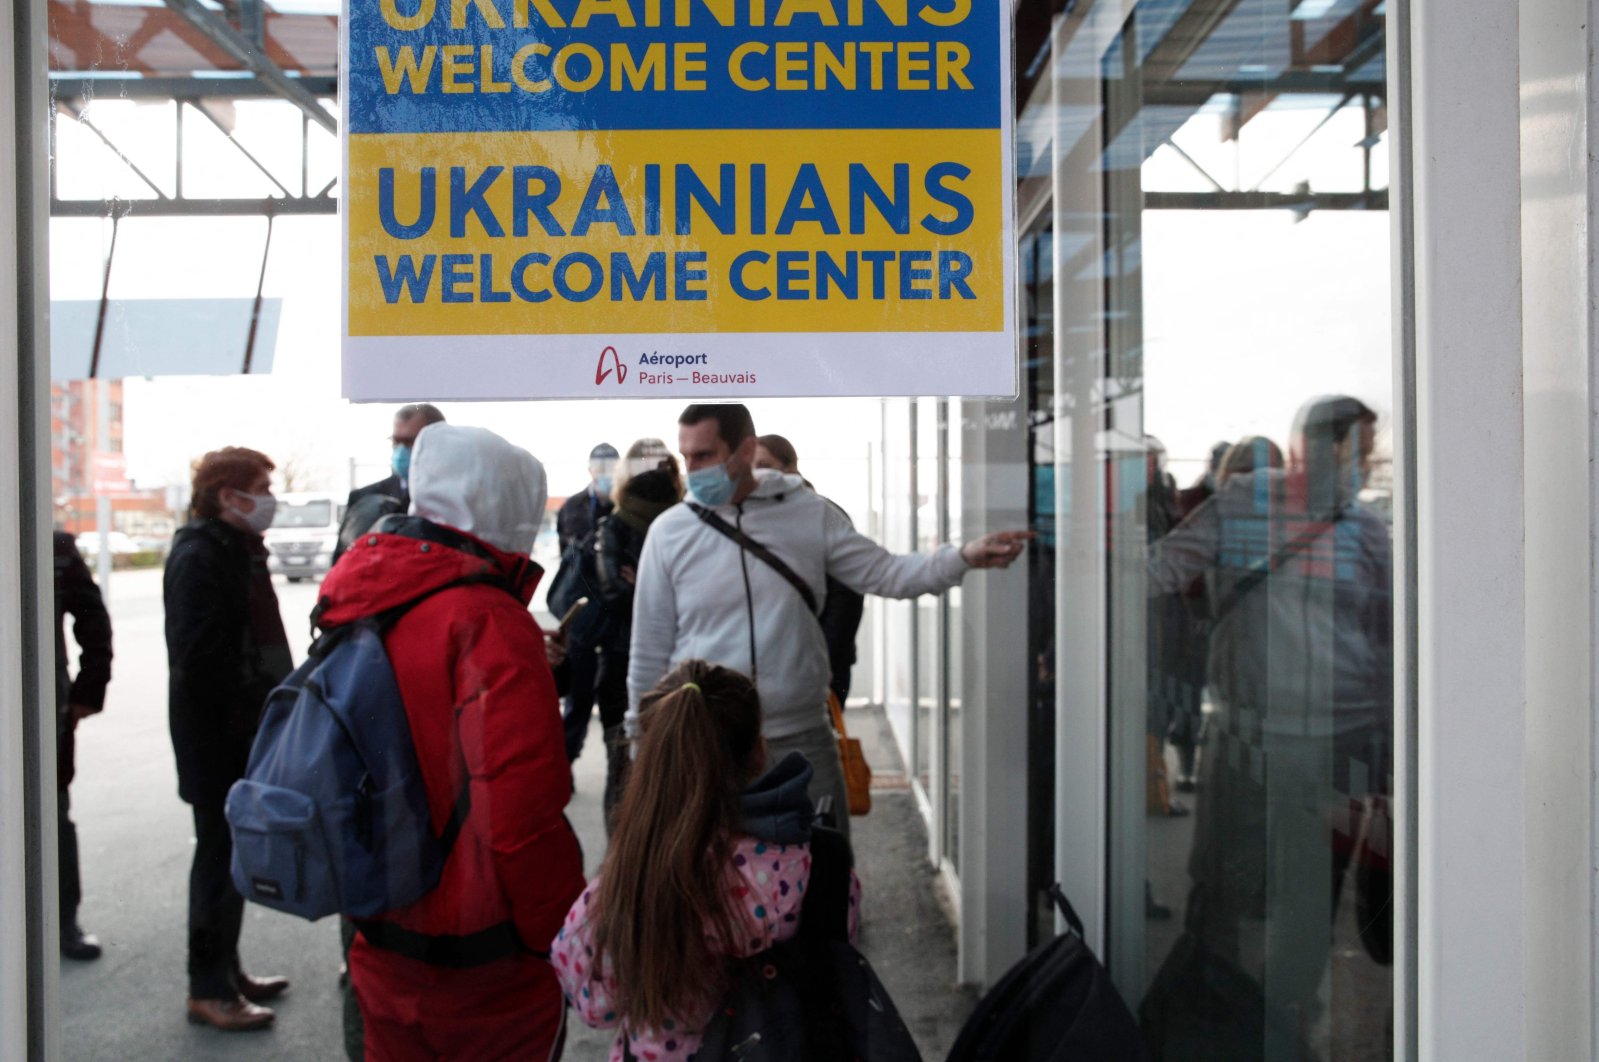 Ukrainian nationals fleeing the conflict in their country gather at a welcome center set up for them after their arrival at the Paris-Beauvais Airport in Tille, north of Paris, France, March 2, 2022. (AFP Photo)